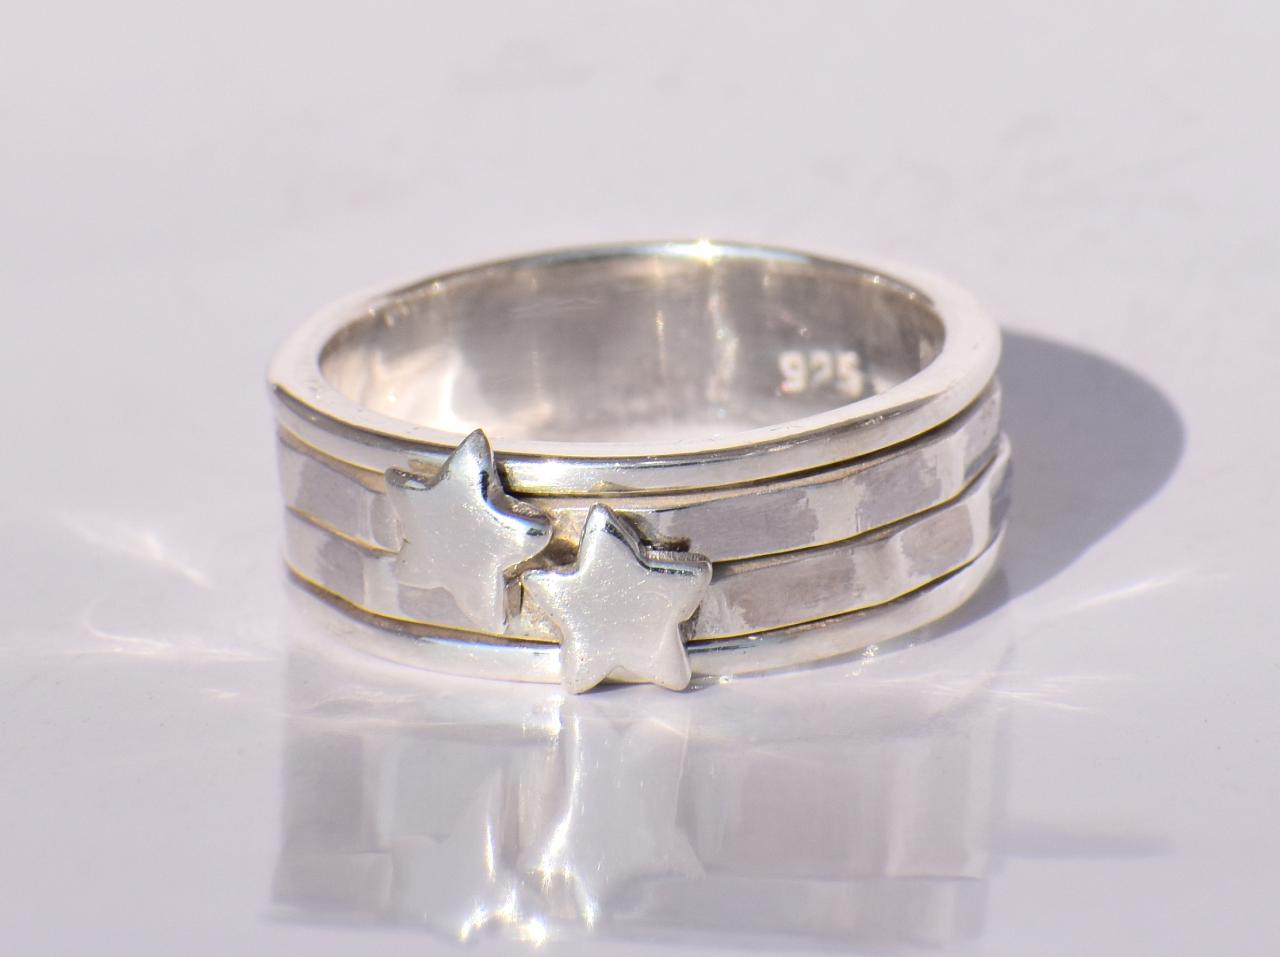 Star On Spinner Band Ring, Sterling Silver Ring, Handmade Ring, Women Silver Ring, Fidget Ring, Anxiety Ring, Bohemian Ring, Gift For Women